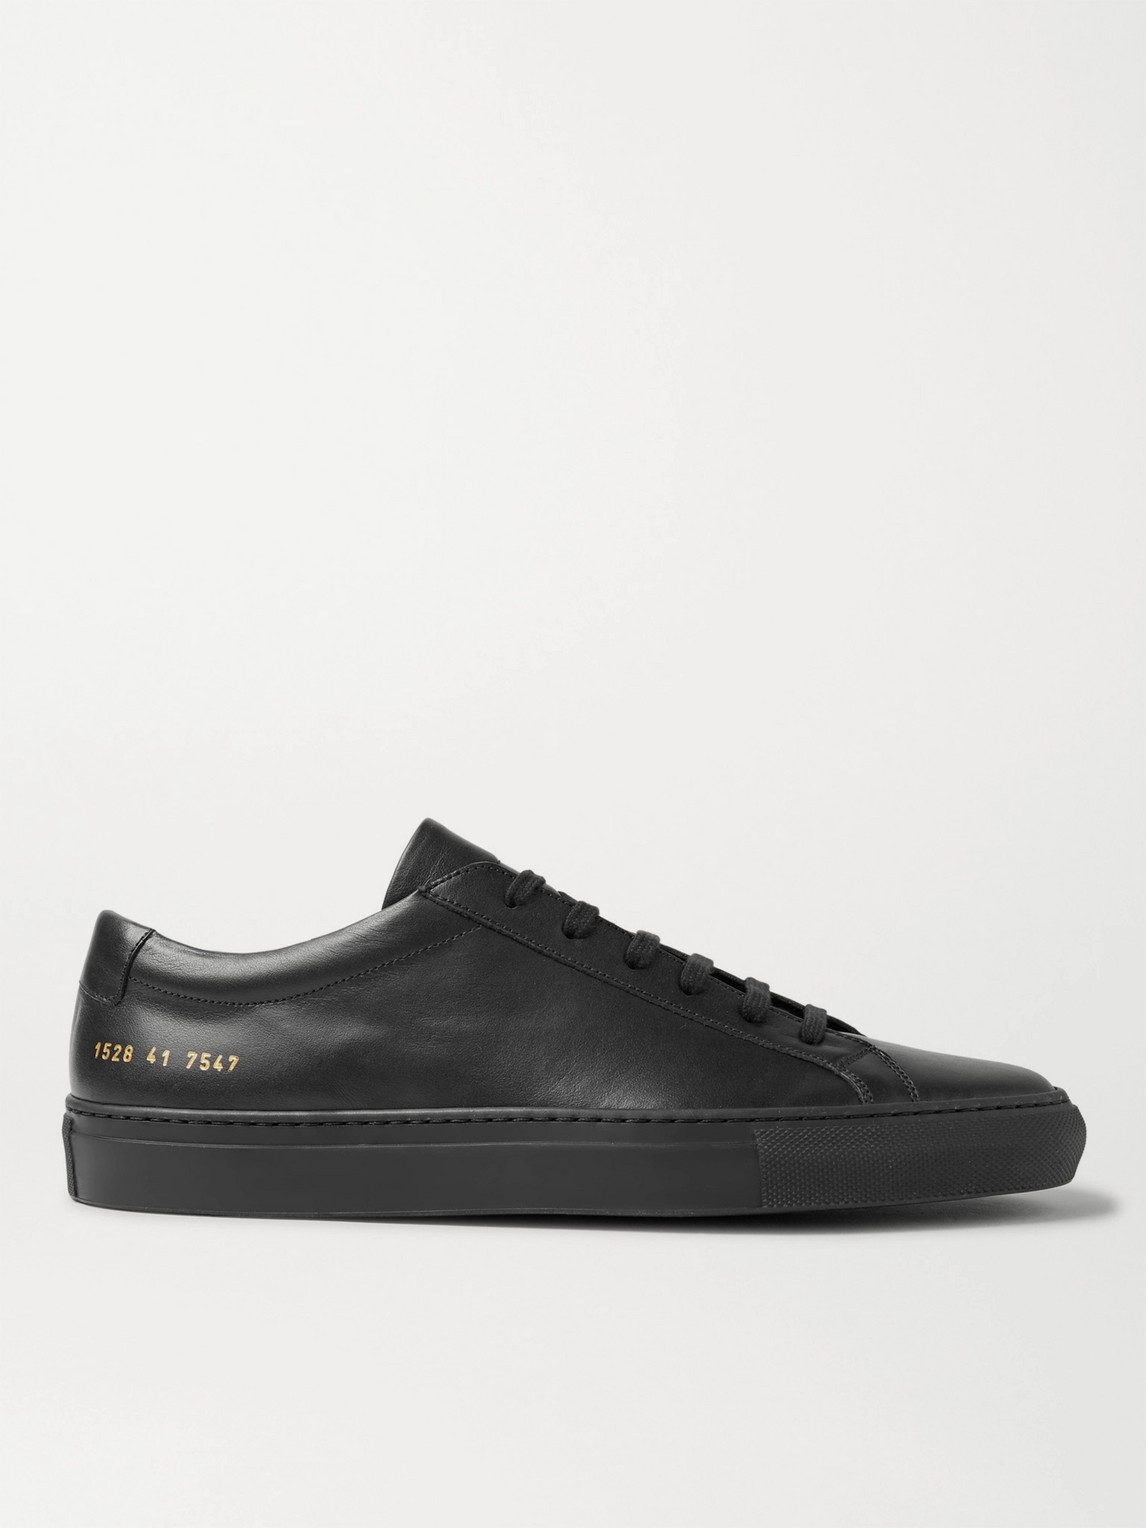 Common Projects Original Achilles Leather Sneakers In Black